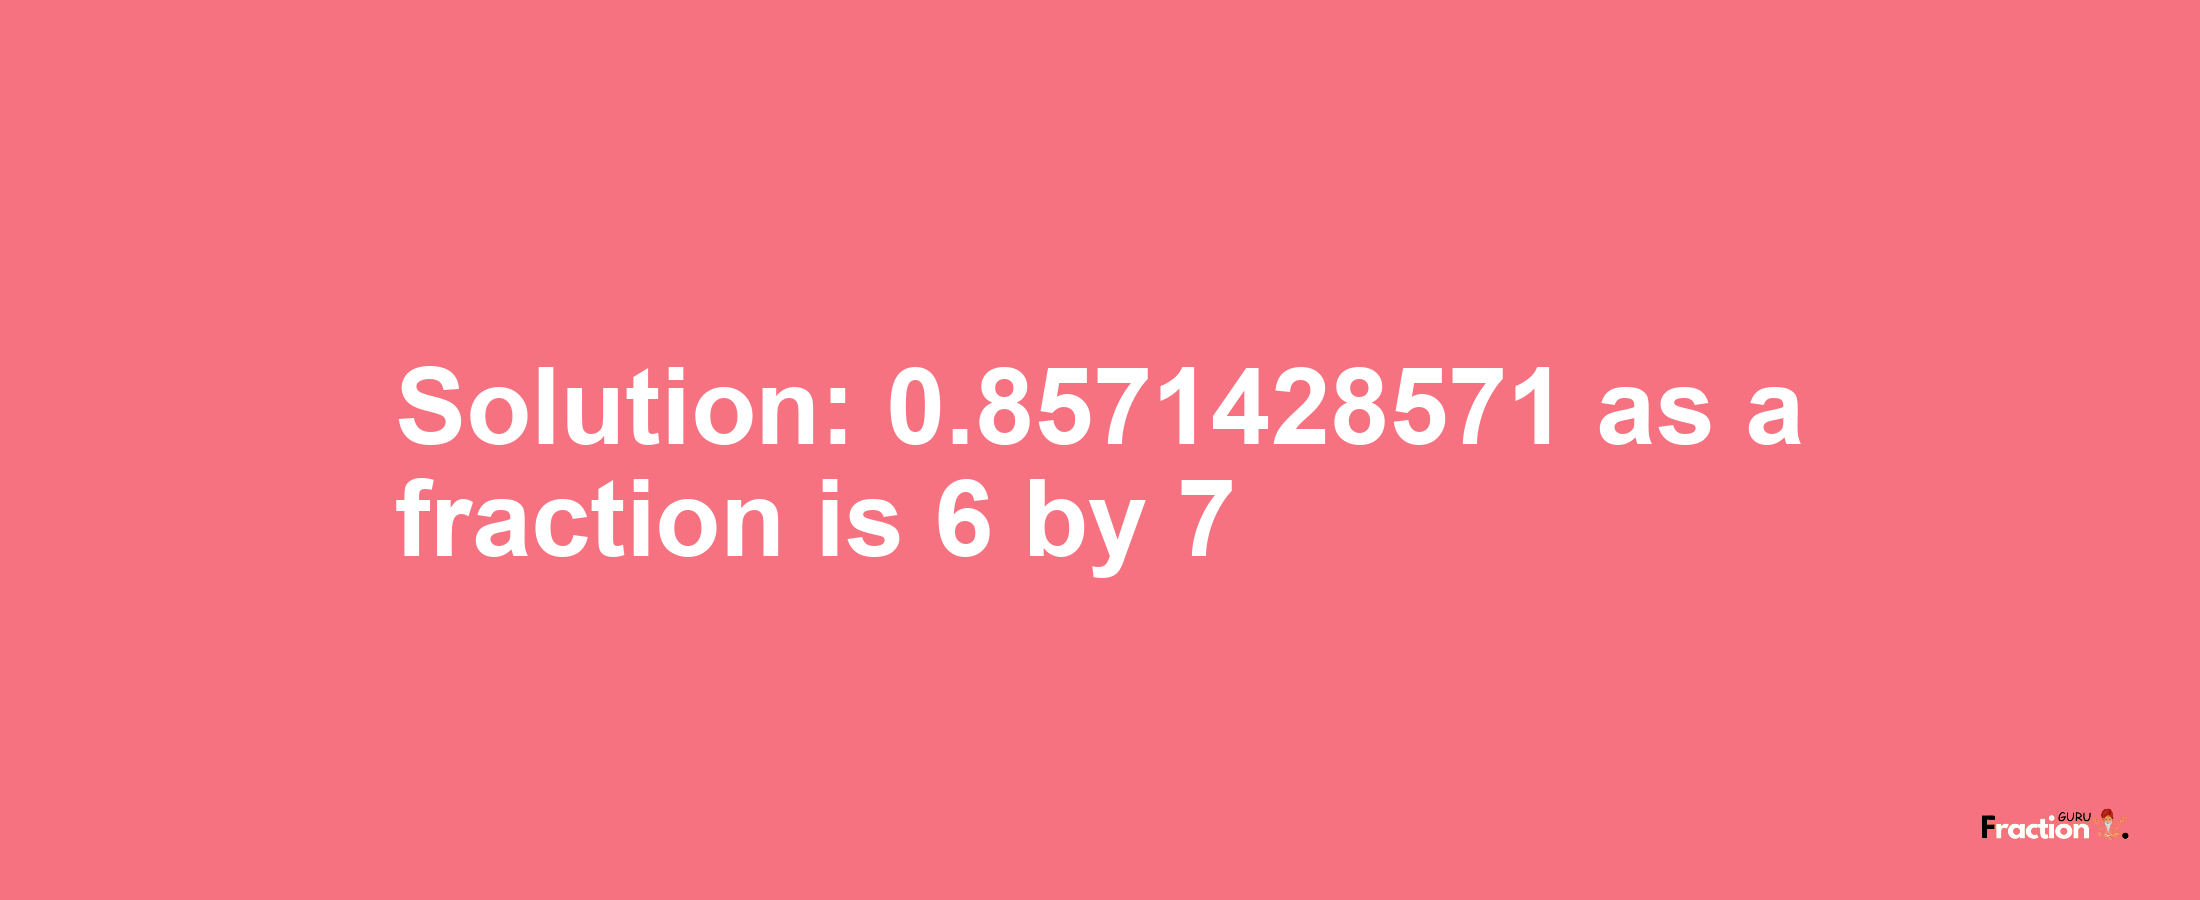 Solution:0.8571428571 as a fraction is 6/7